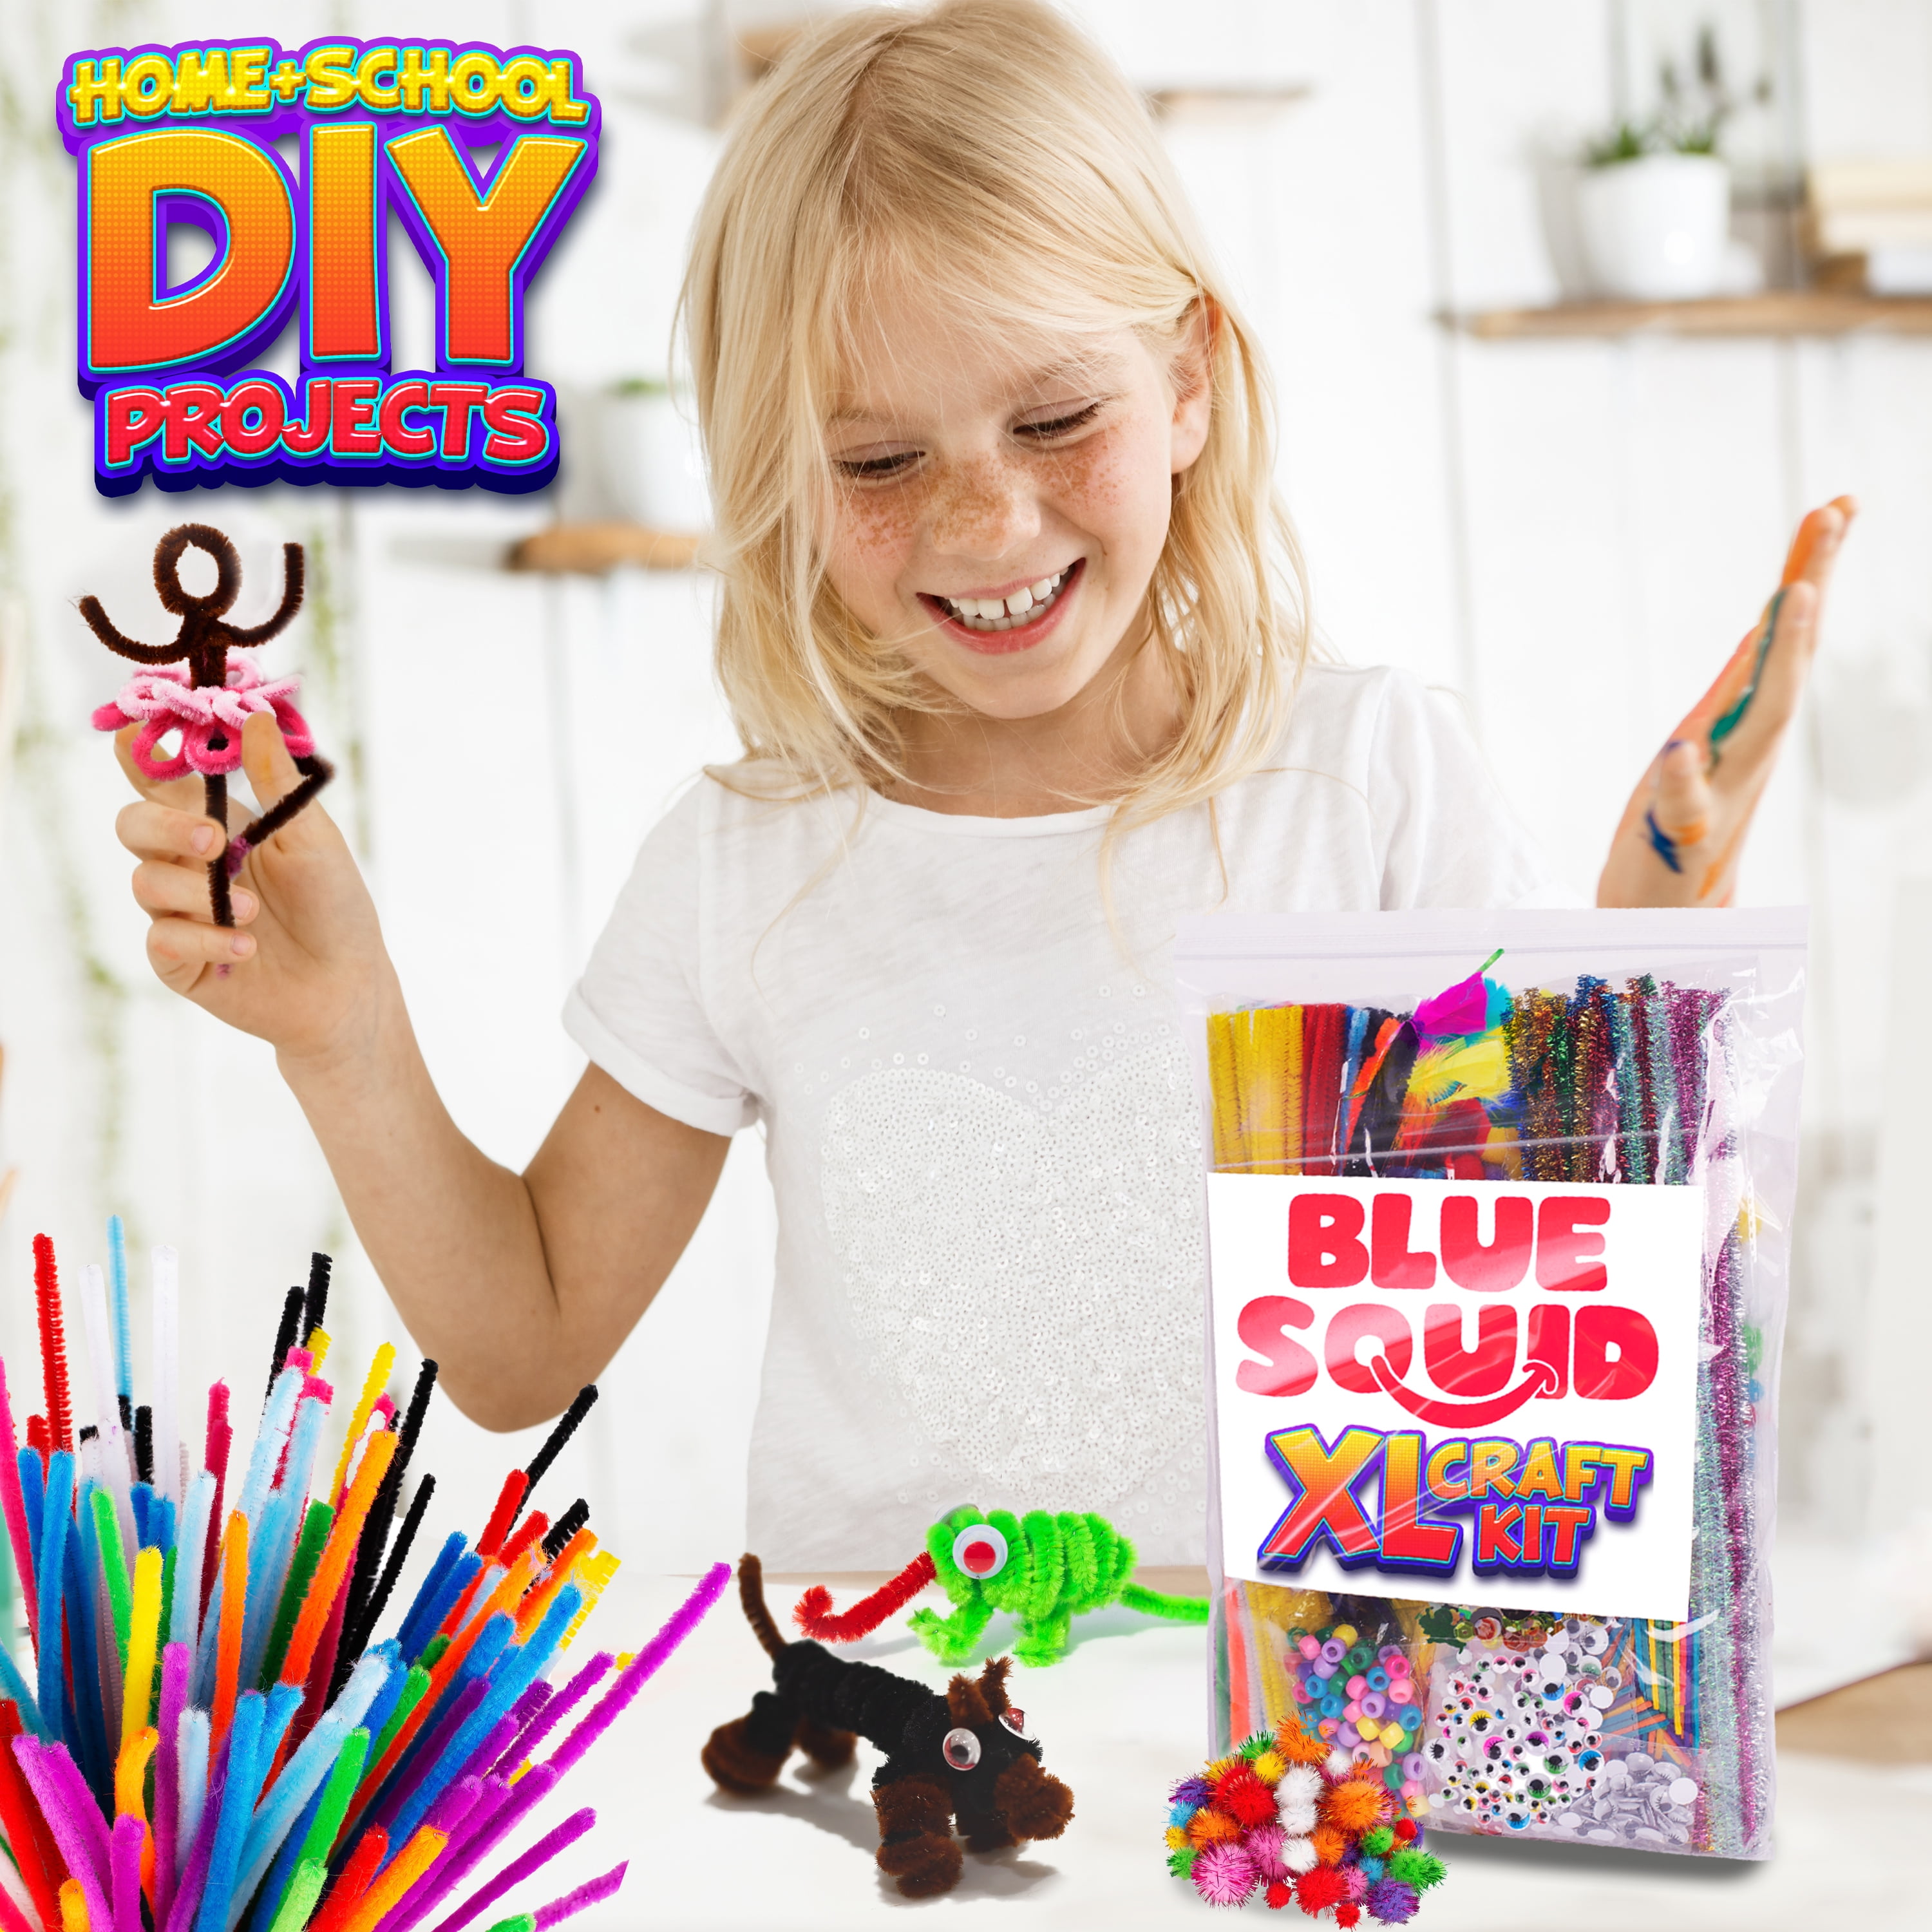 The Best Craft Supplies for Kids • In the Bag Kids' Crafts